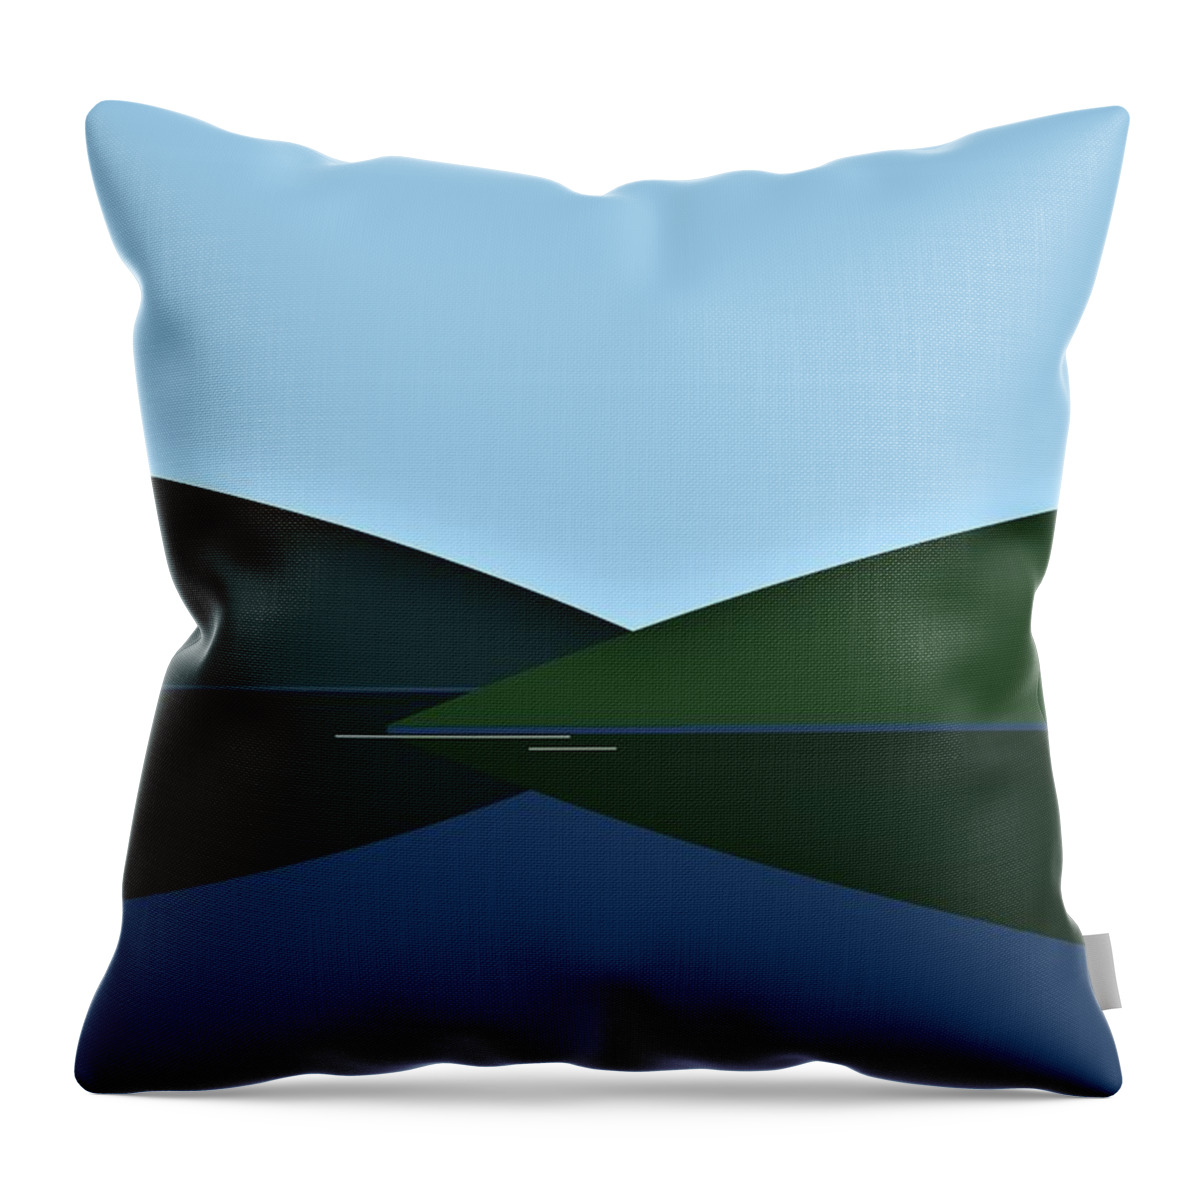 Lake Throw Pillow featuring the digital art The Lake by Fatline Graphic Art